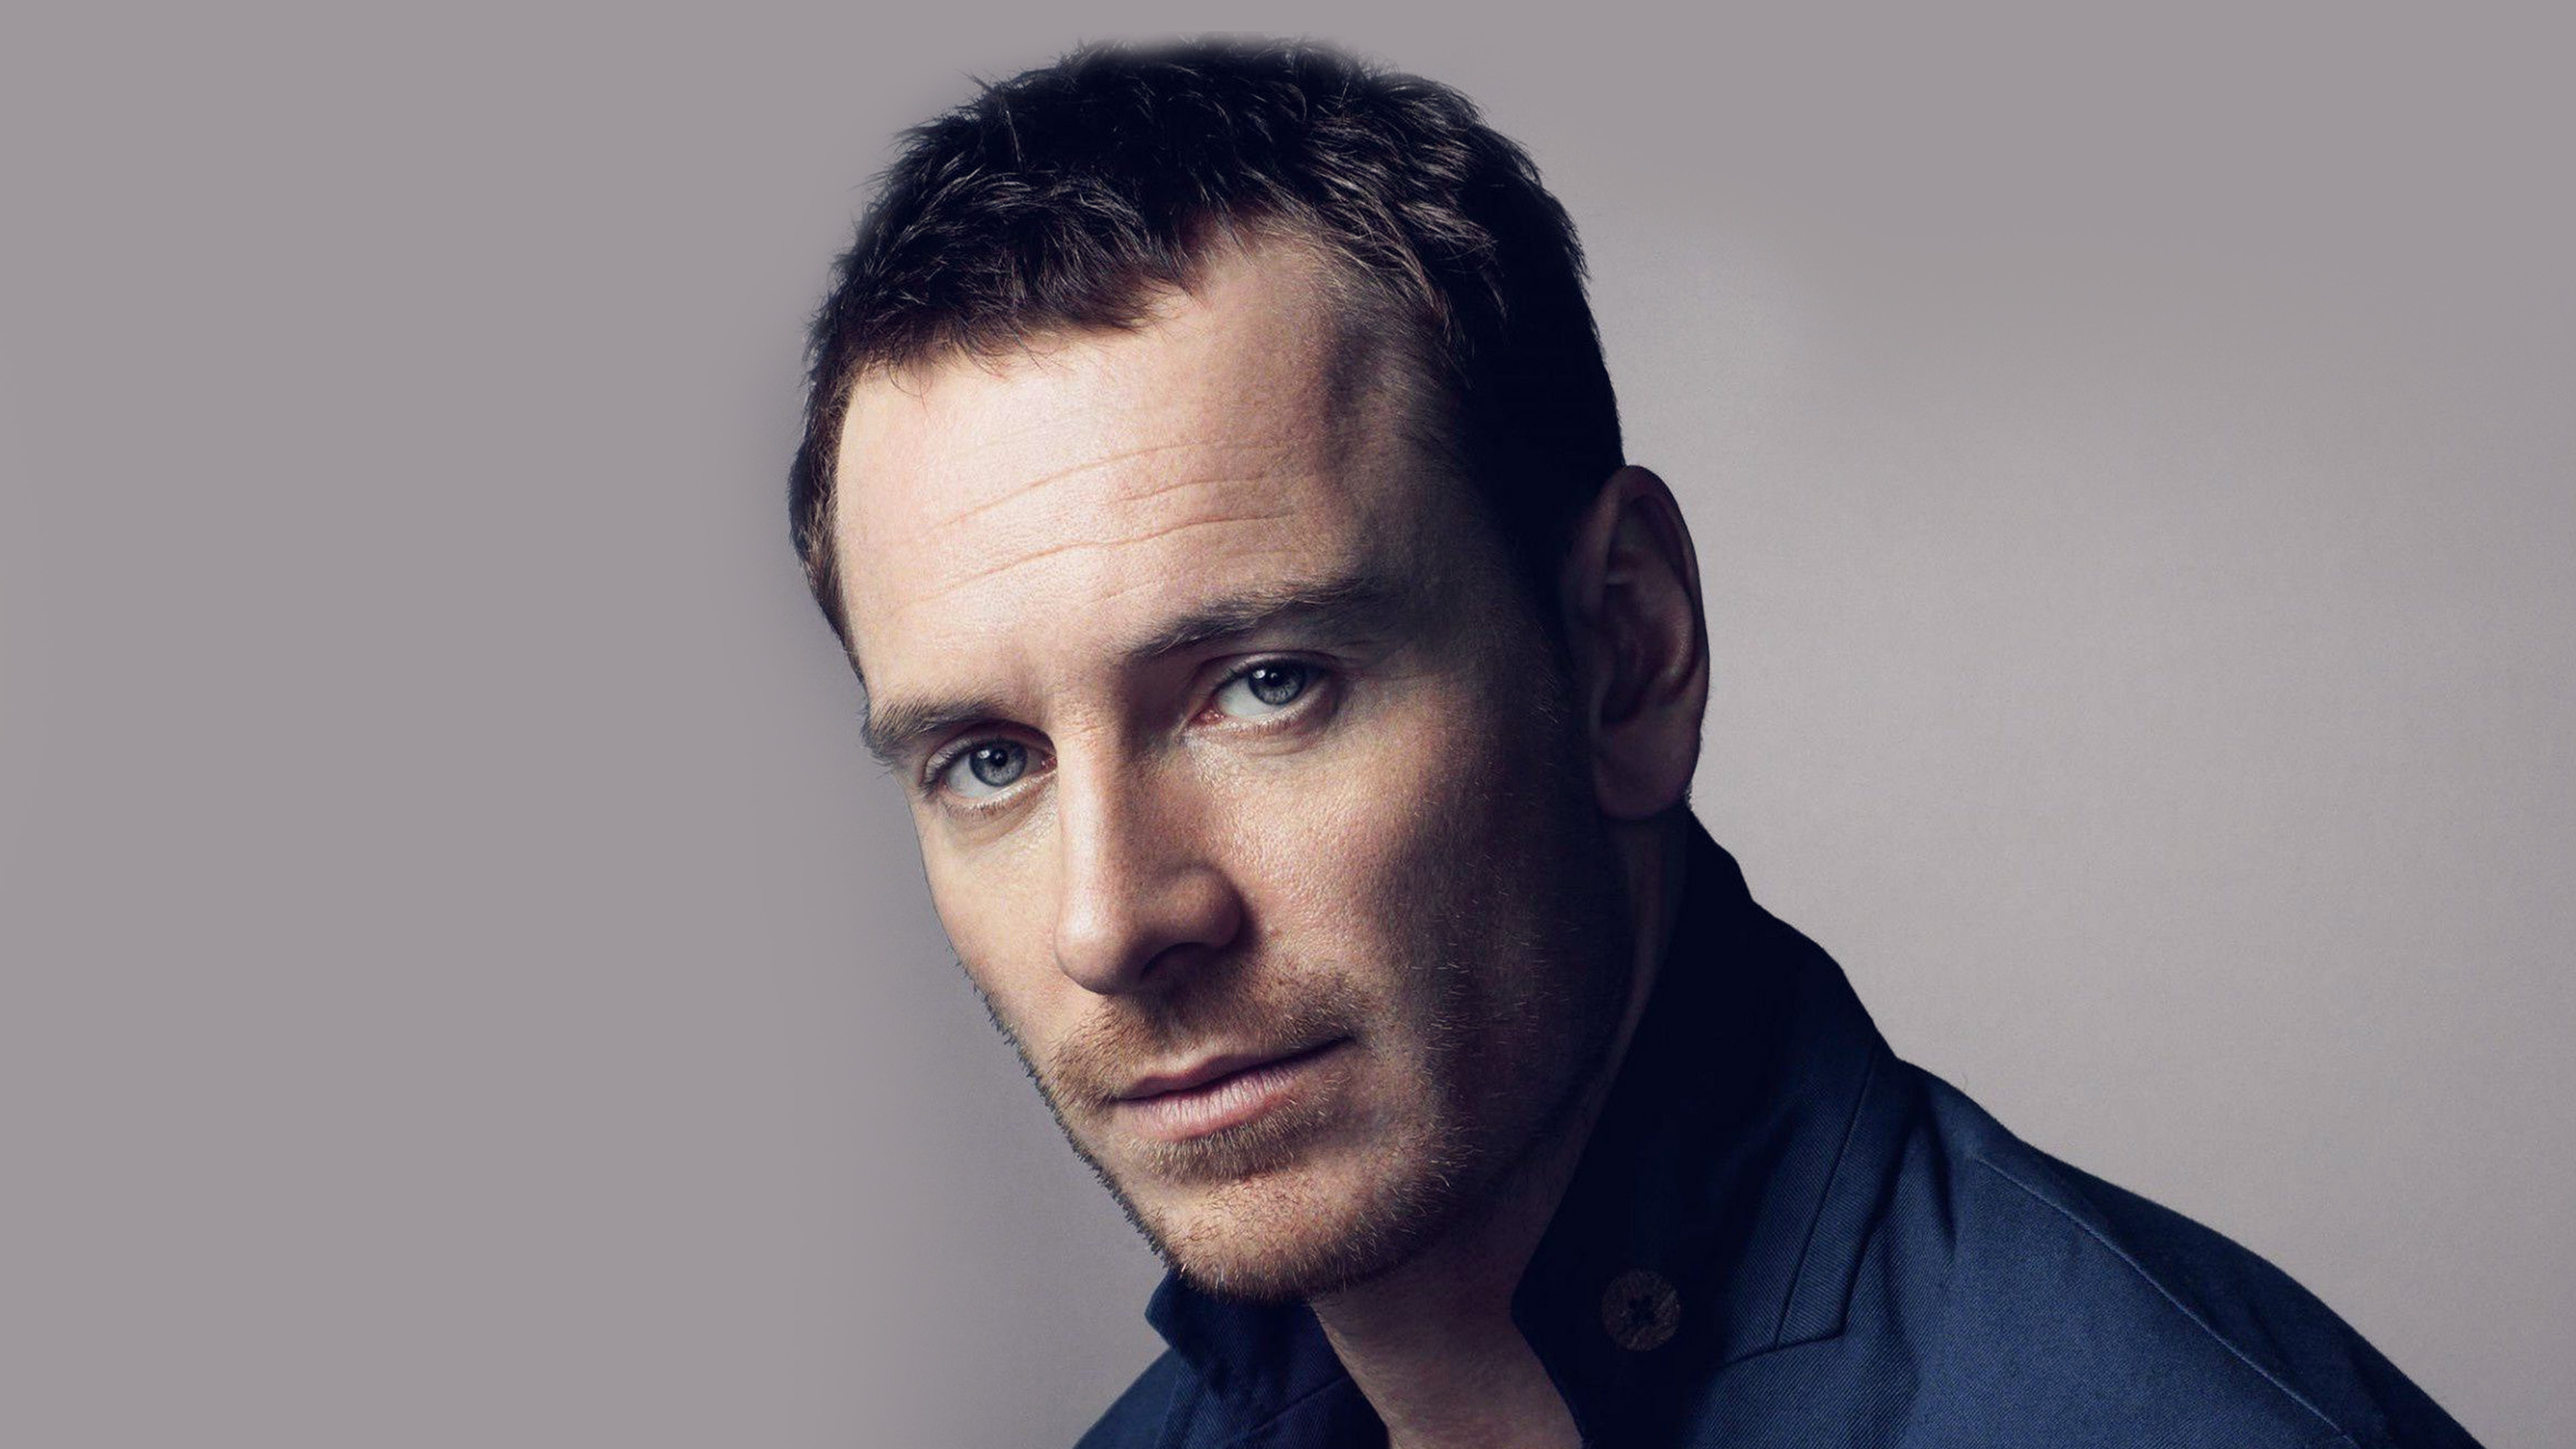 Michael Fassbender Wallpapers Images Photos Pictures Backgrounds 